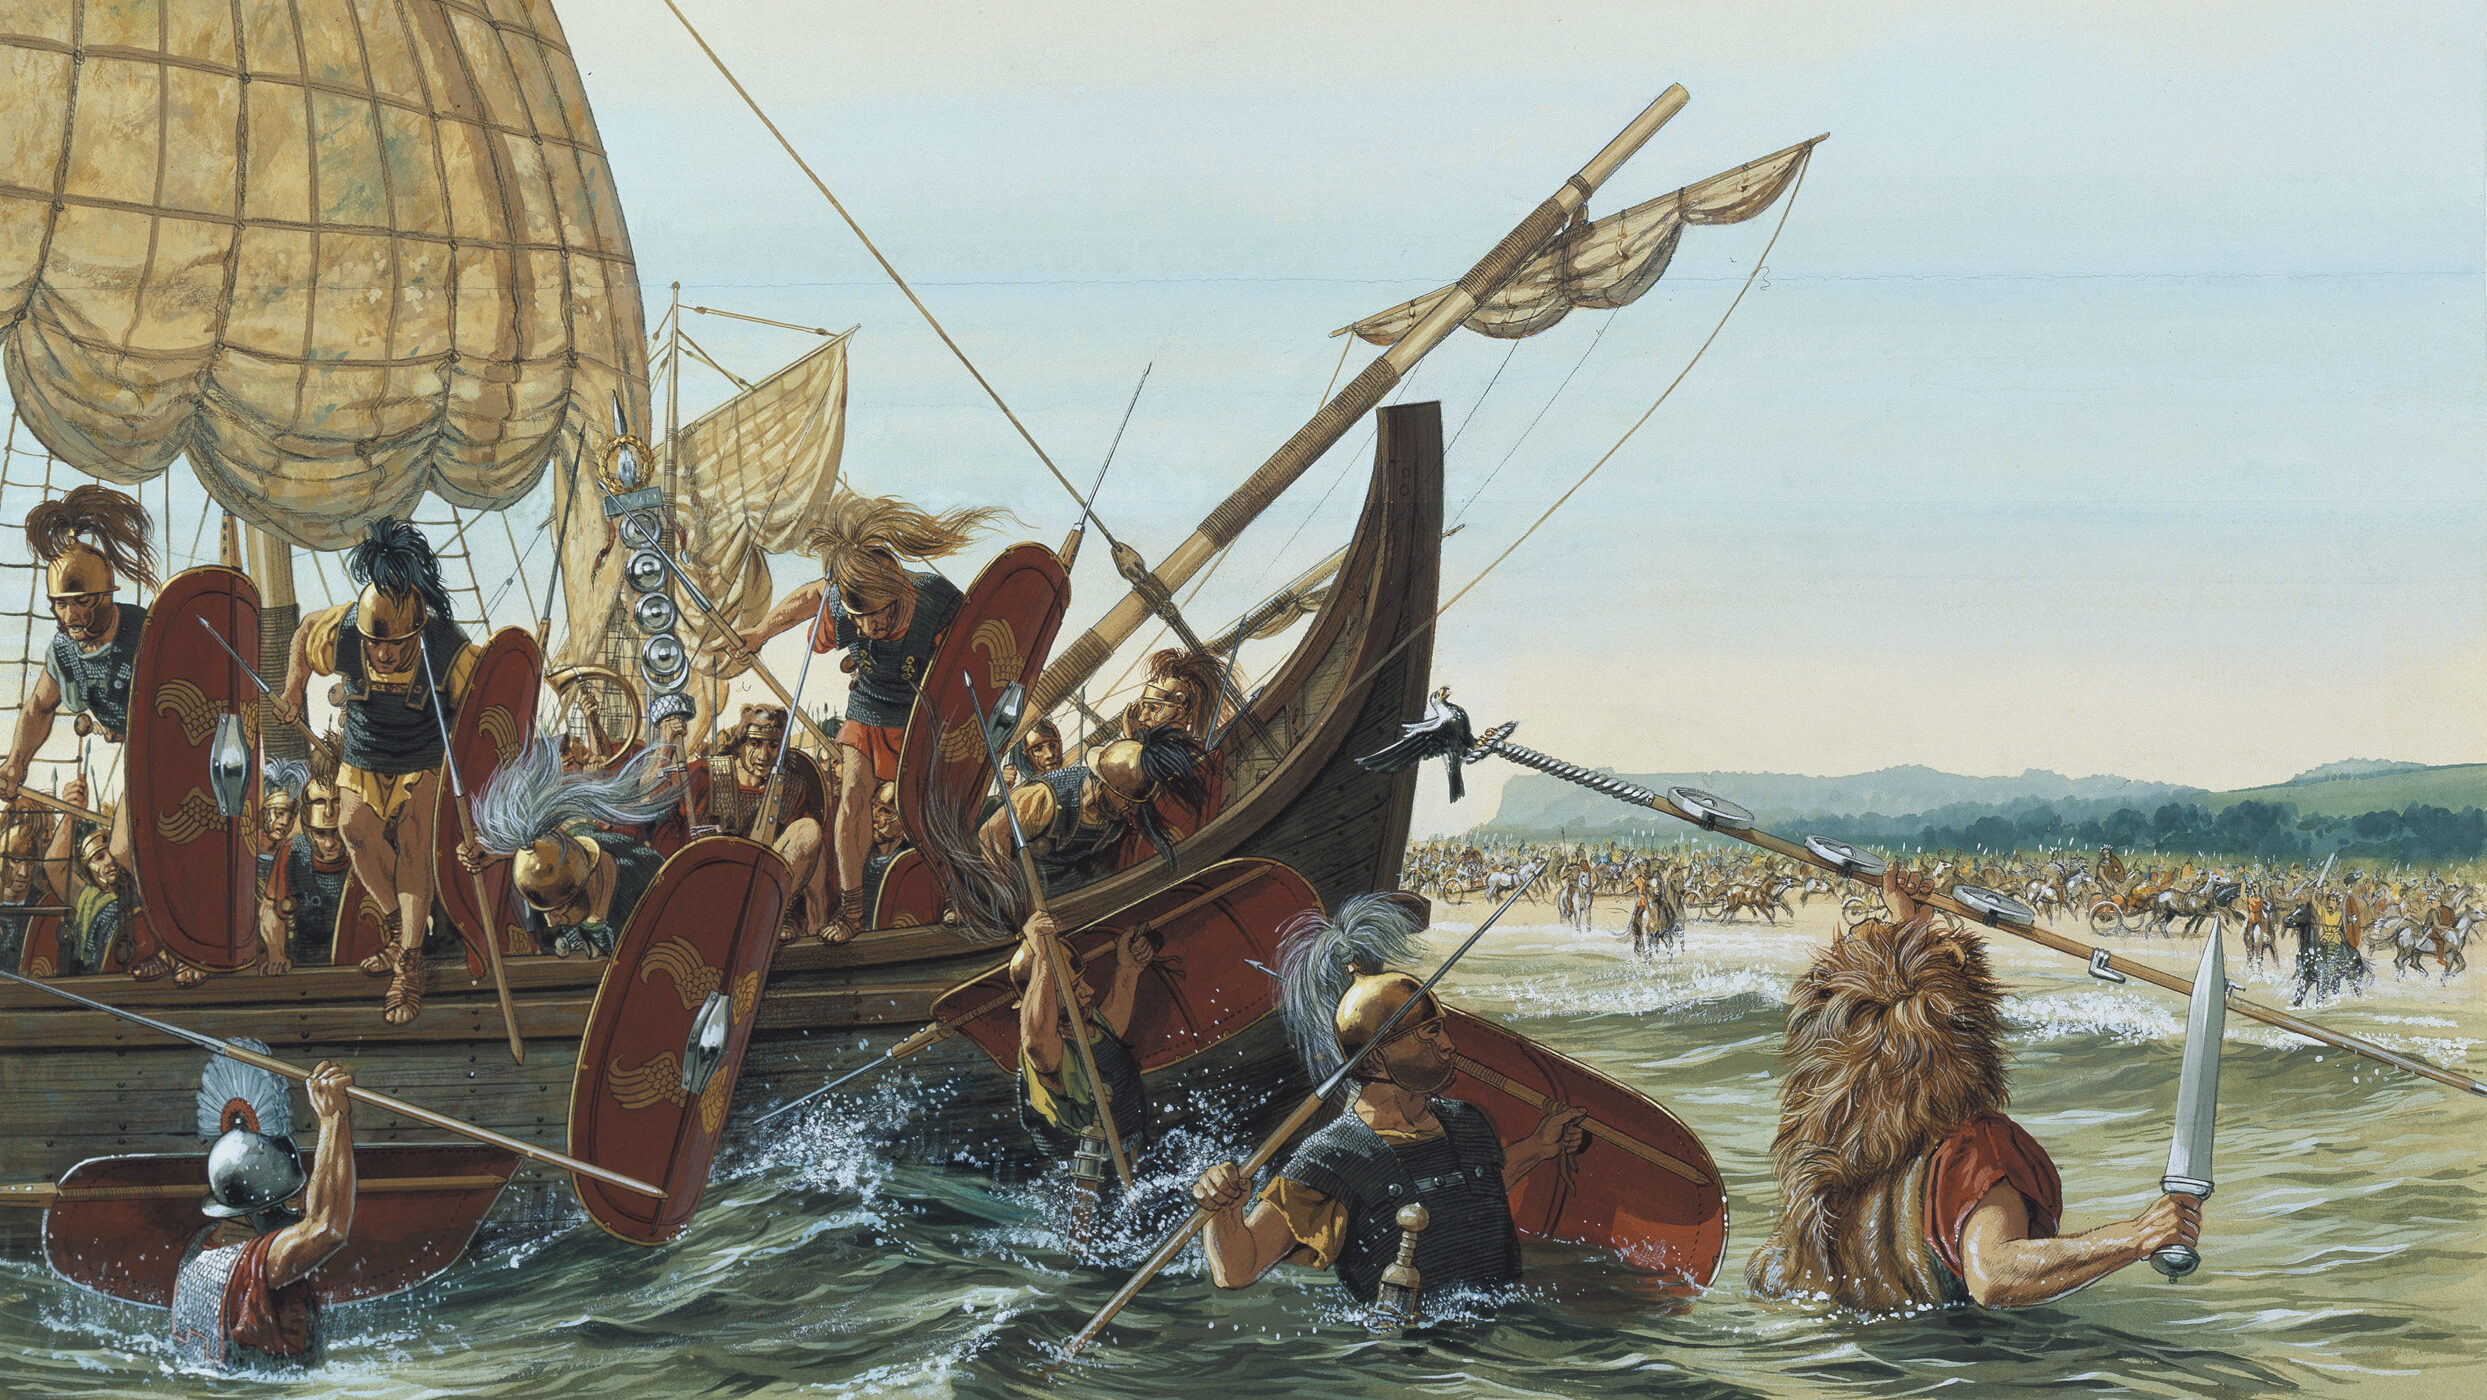 Roman legionaries clamber out of galleys and wade toward the battle on the English shore.